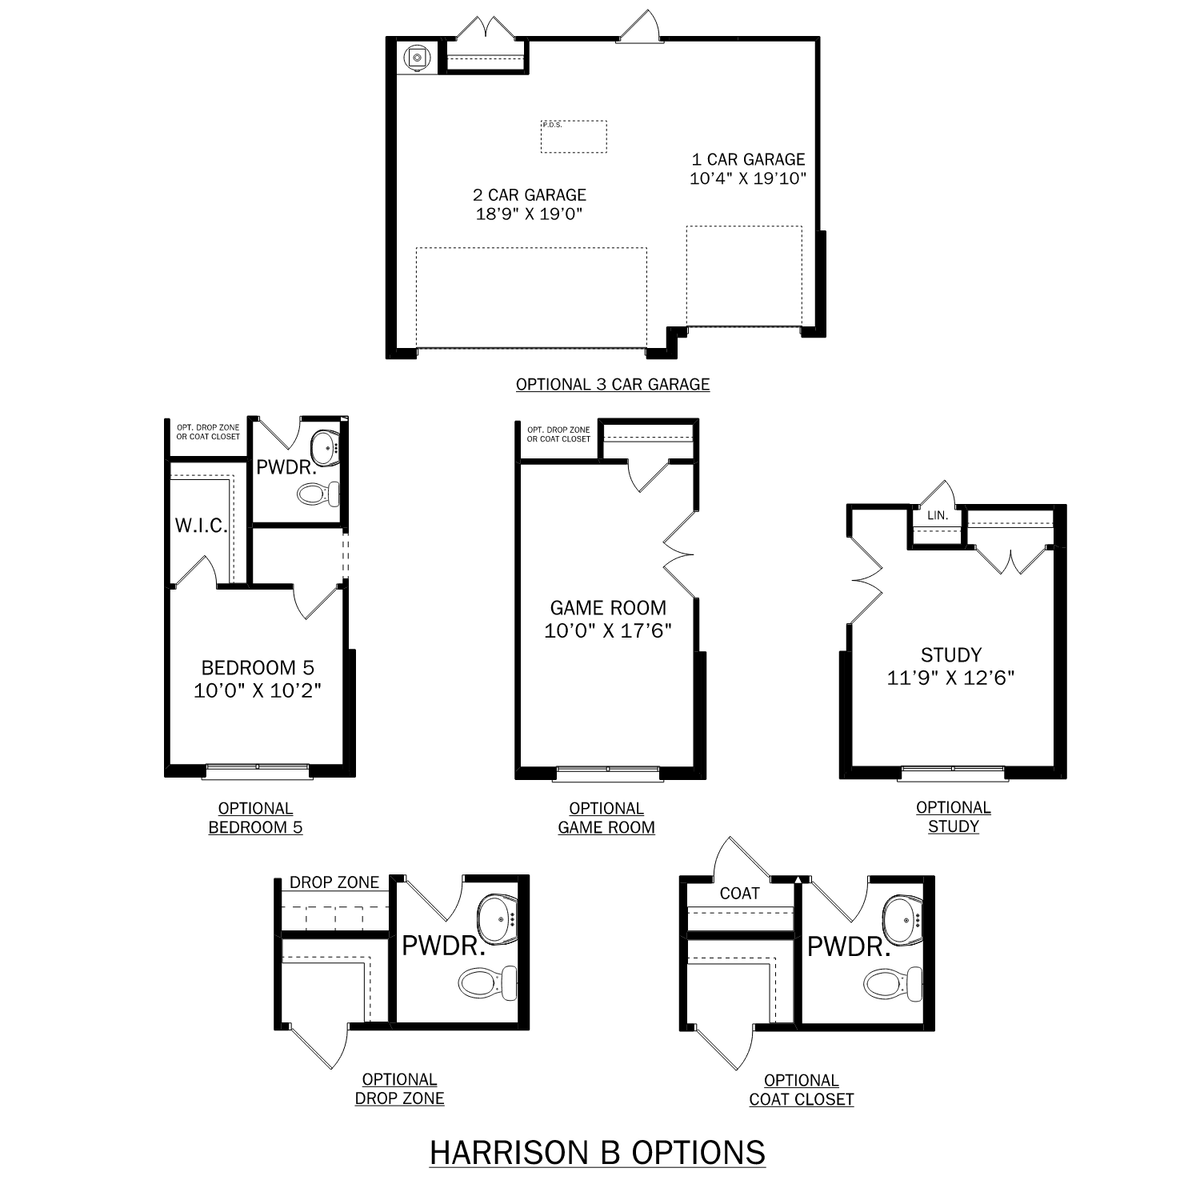 2 - The Harrison B buildable floor plan layout in Davidson Homes' Kendall Downs community.